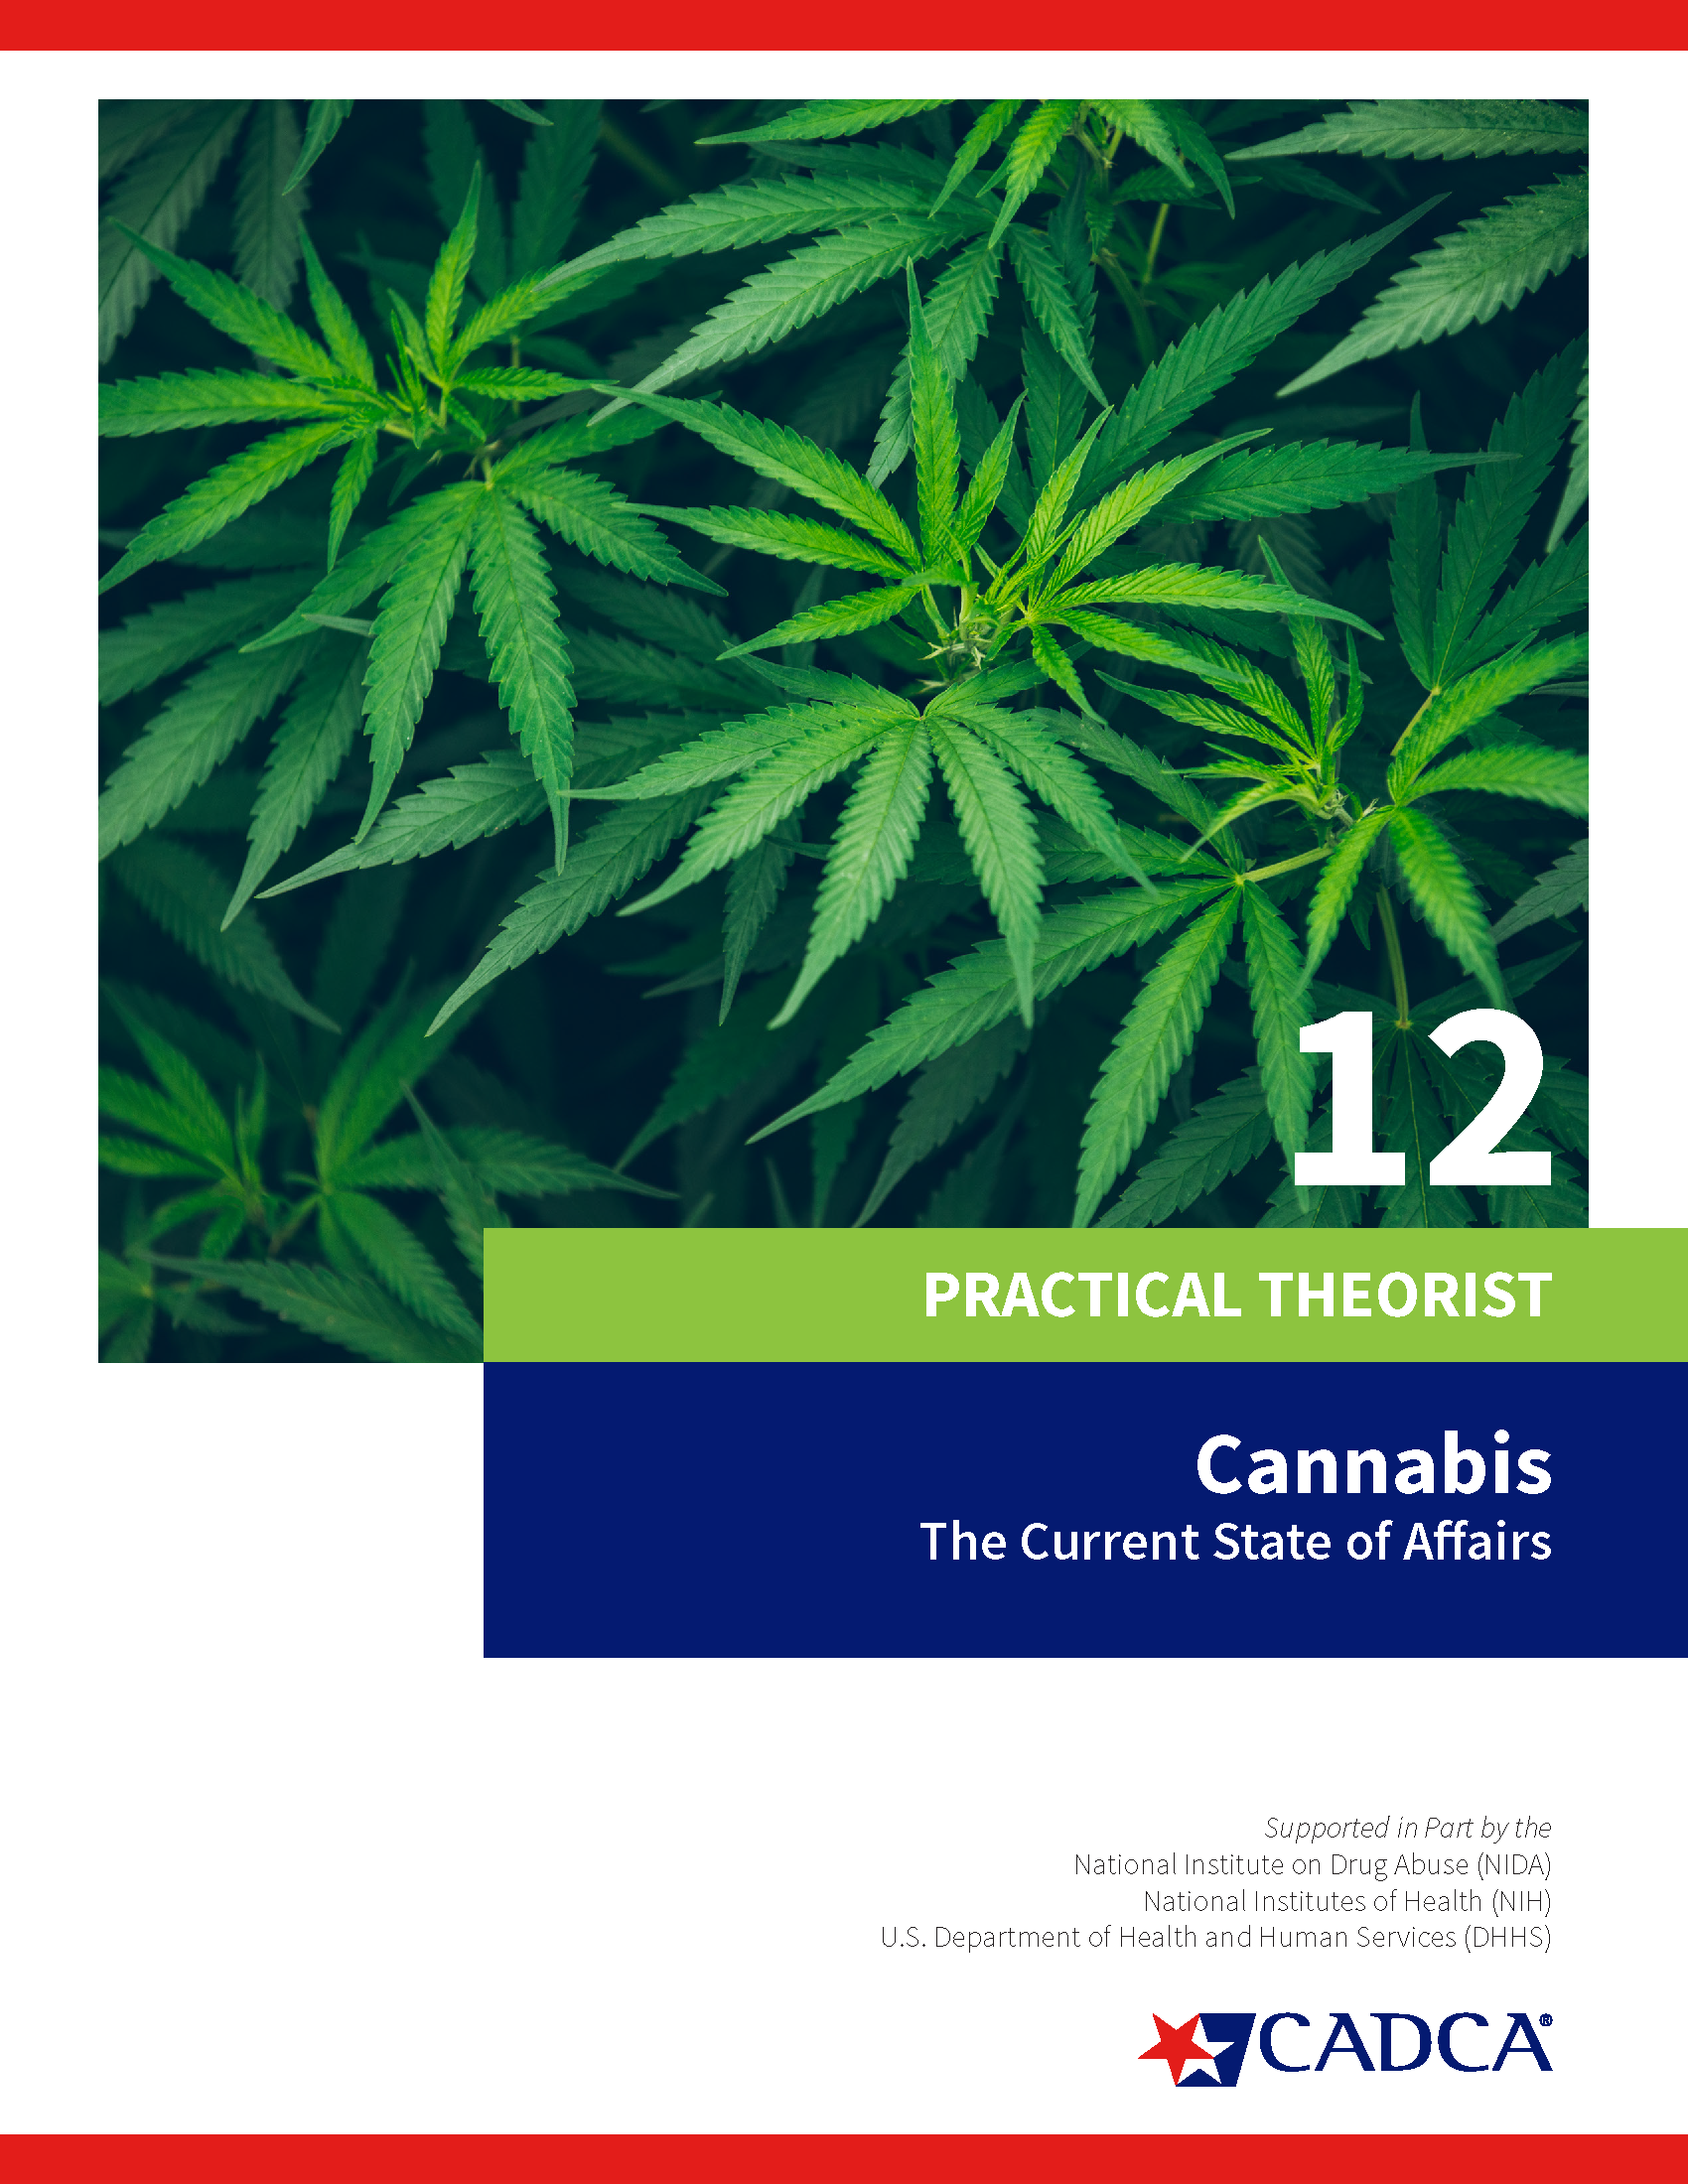 Practical Theorist 12 - Cannabis, The Current State of Affairs - Download